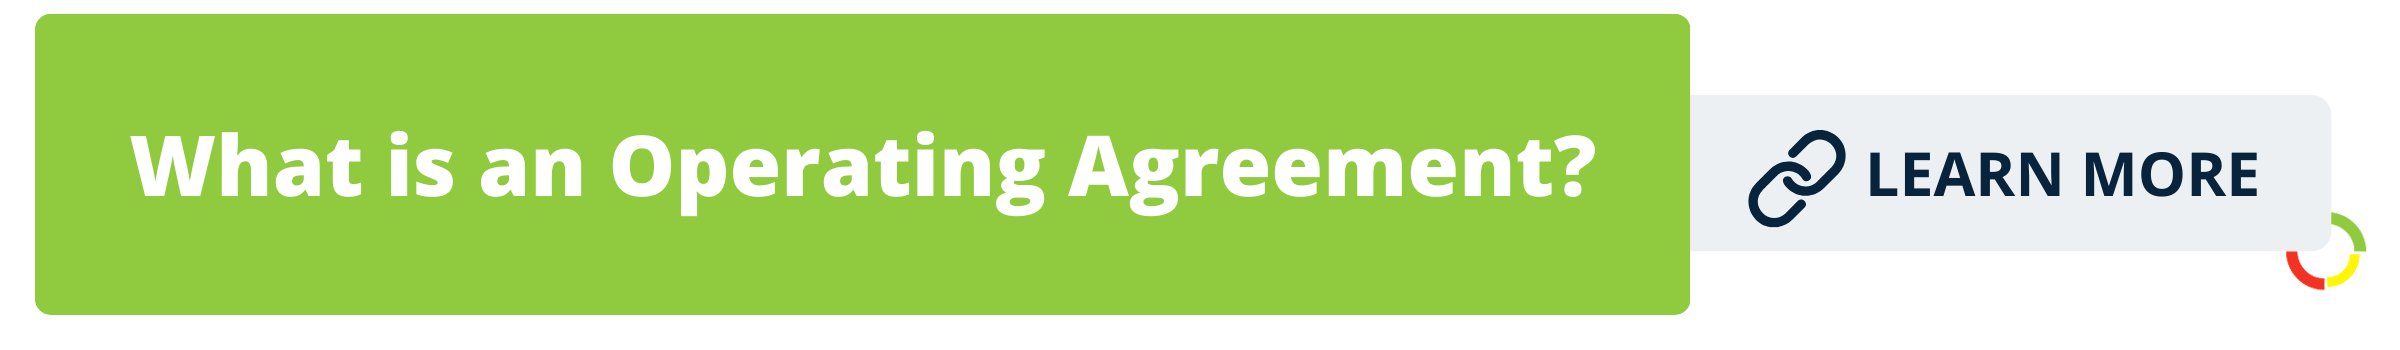 What is an Operating Agreement?